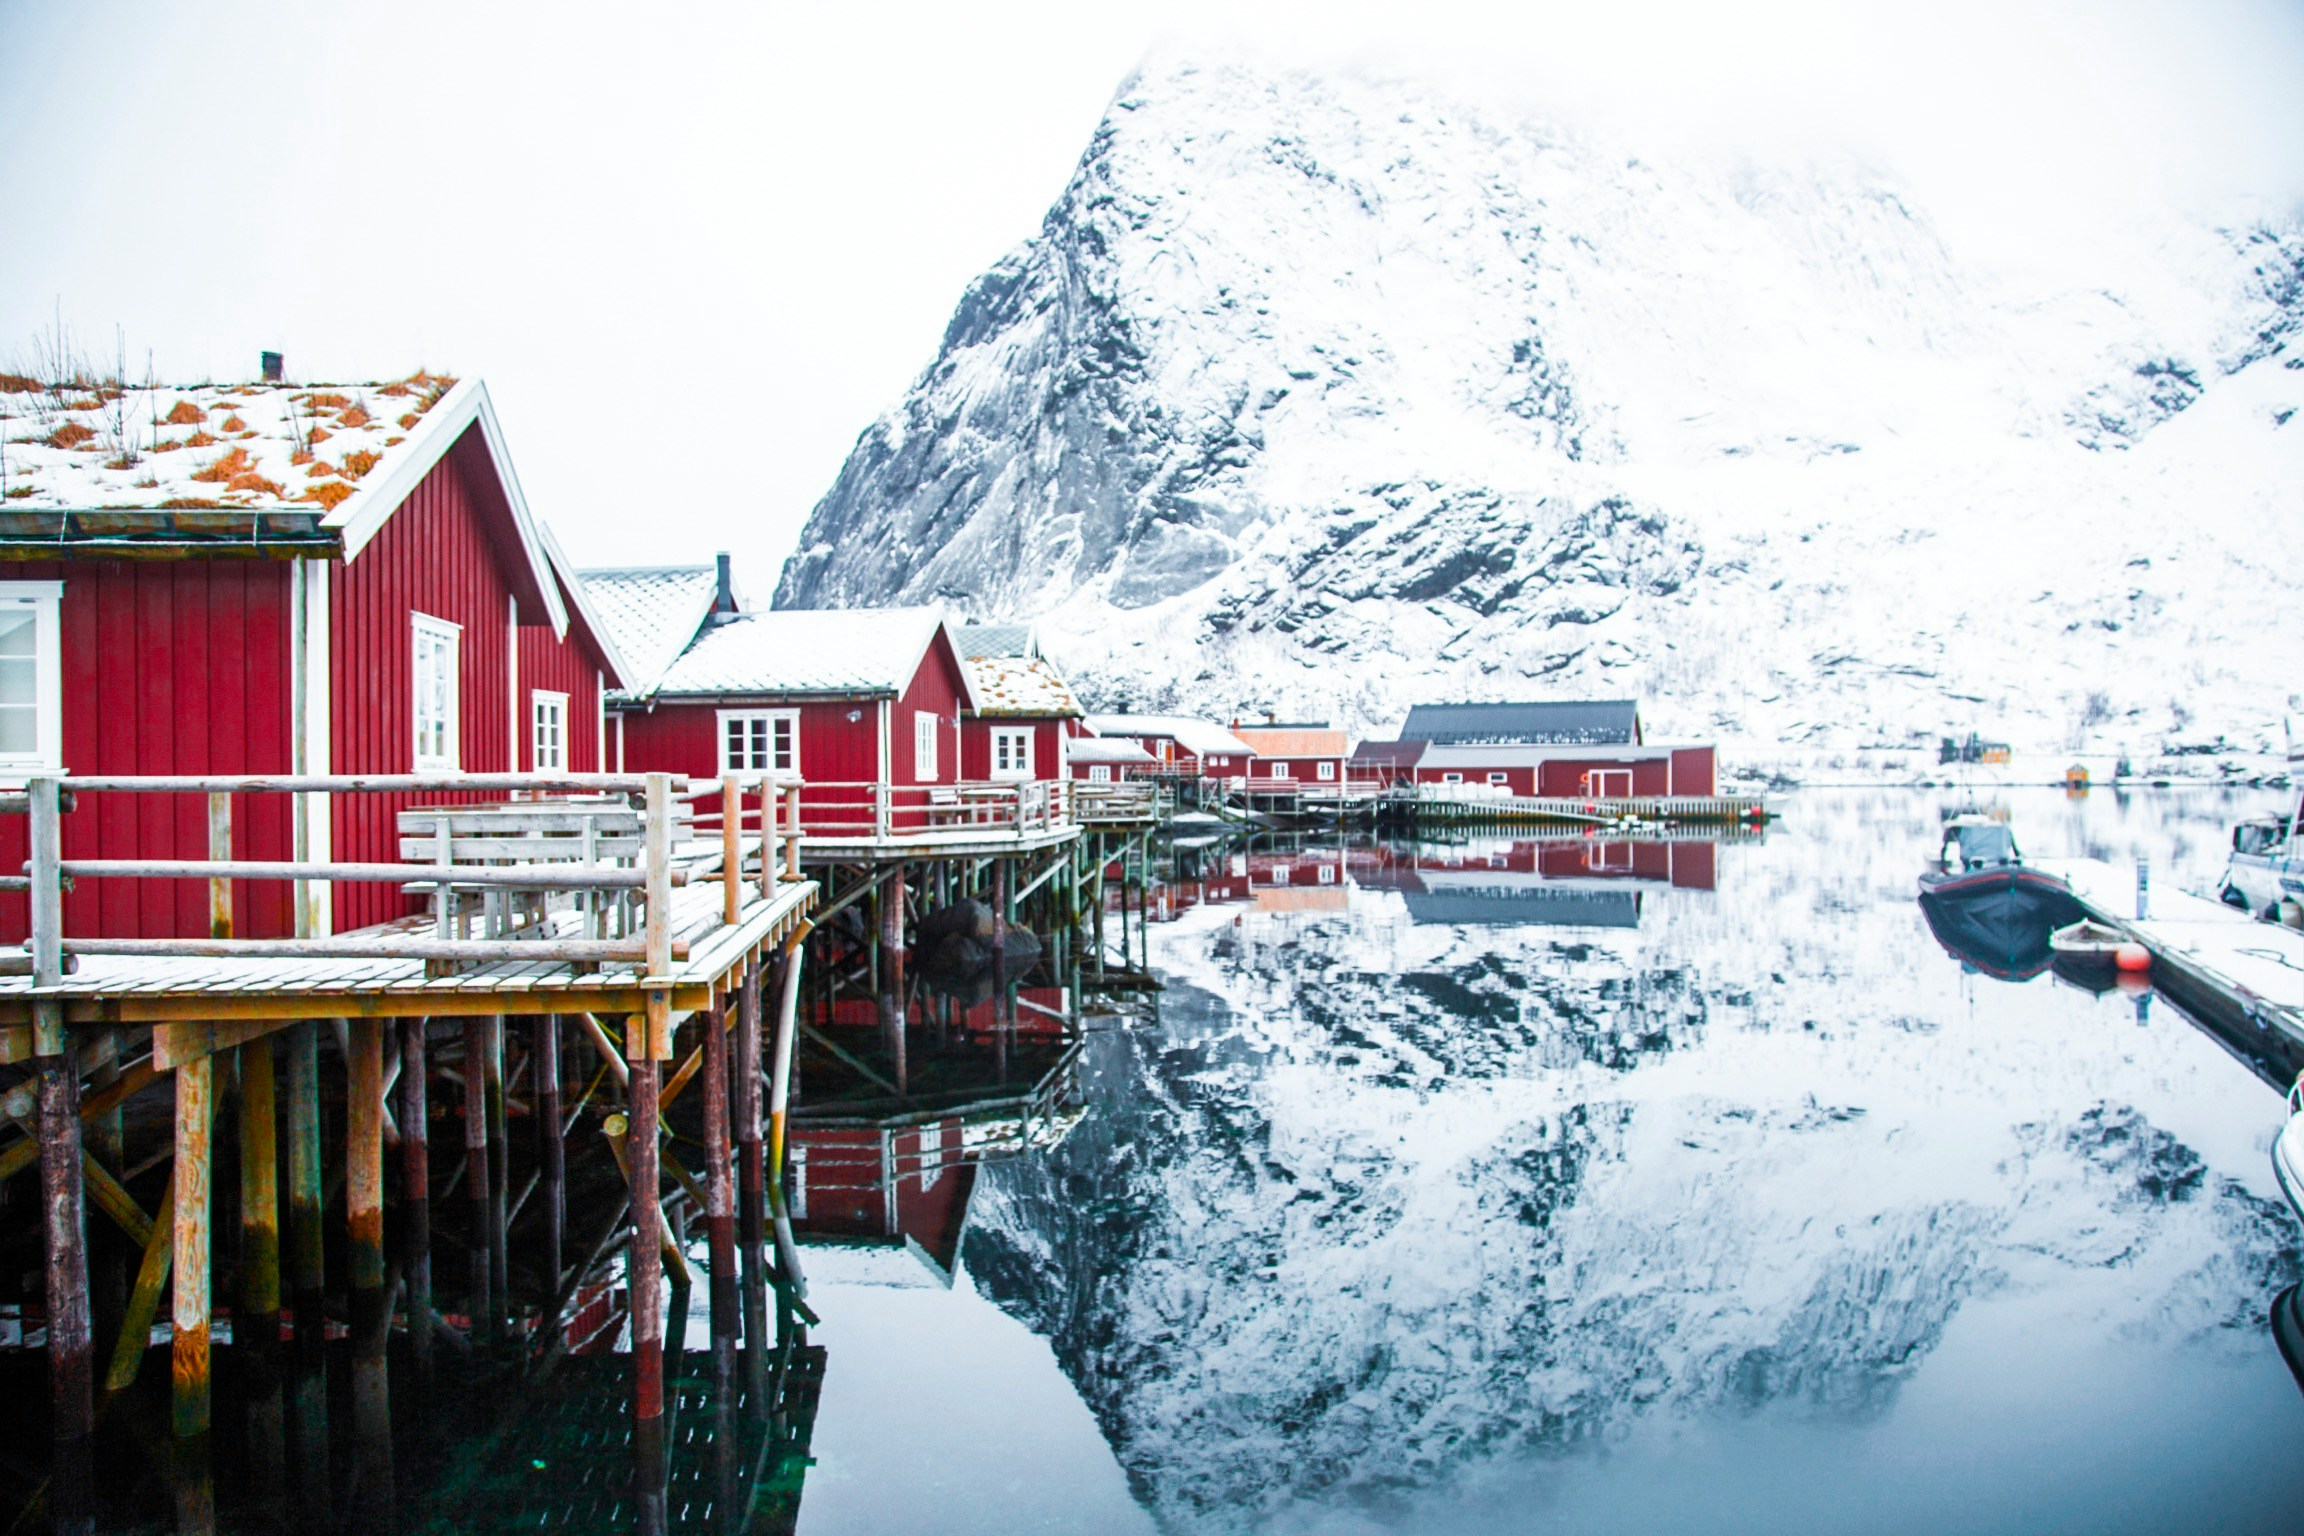 explore the breathtaking fjords and stunning natural landscapes in our fjords travel guide. plan your adventure to discover the beauty of fjords around the world.